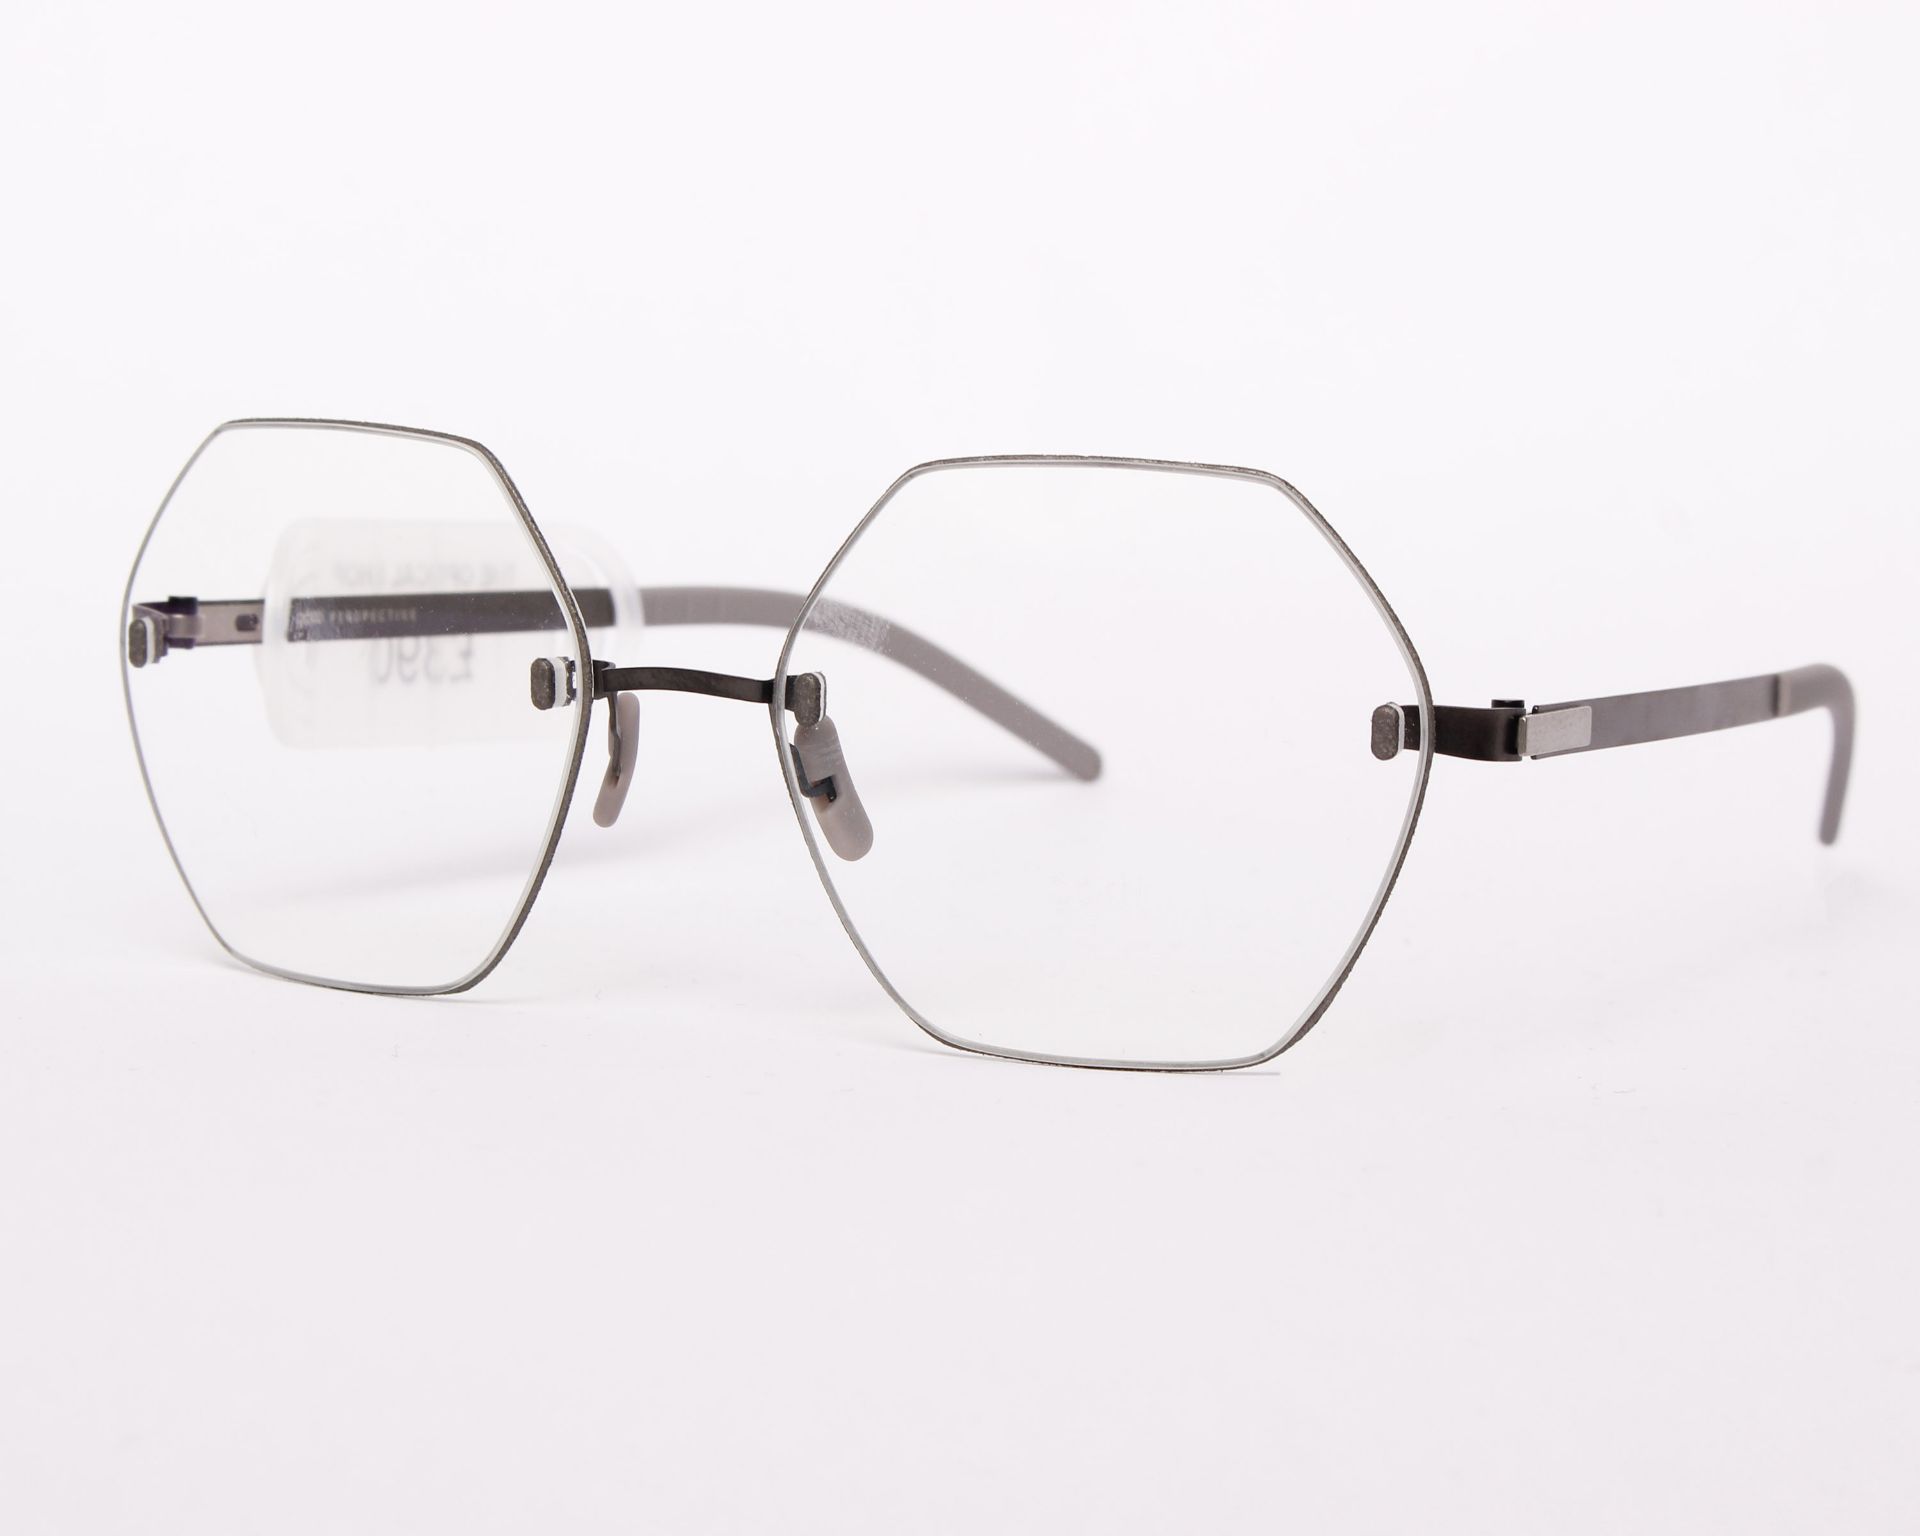 A pair of as new Gotti Perspective glasses frames with clear glass (RRP £390). - Image 3 of 3